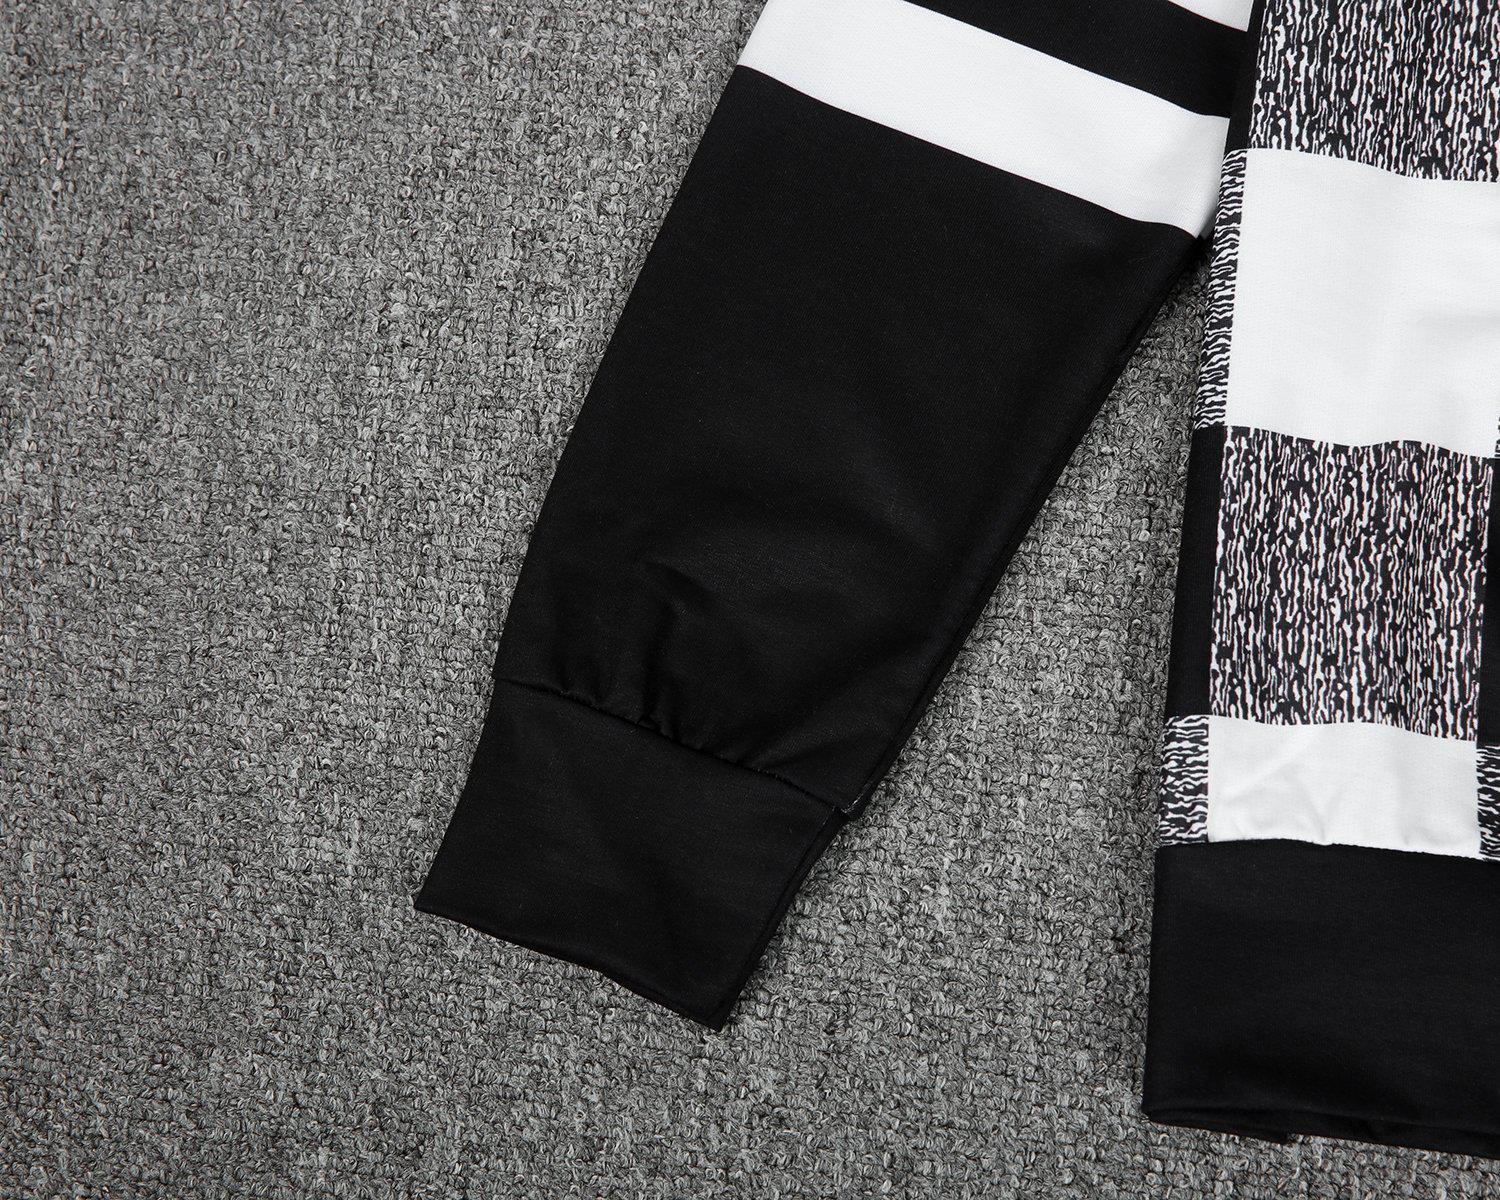 Black and White Checkerboard Hoodie